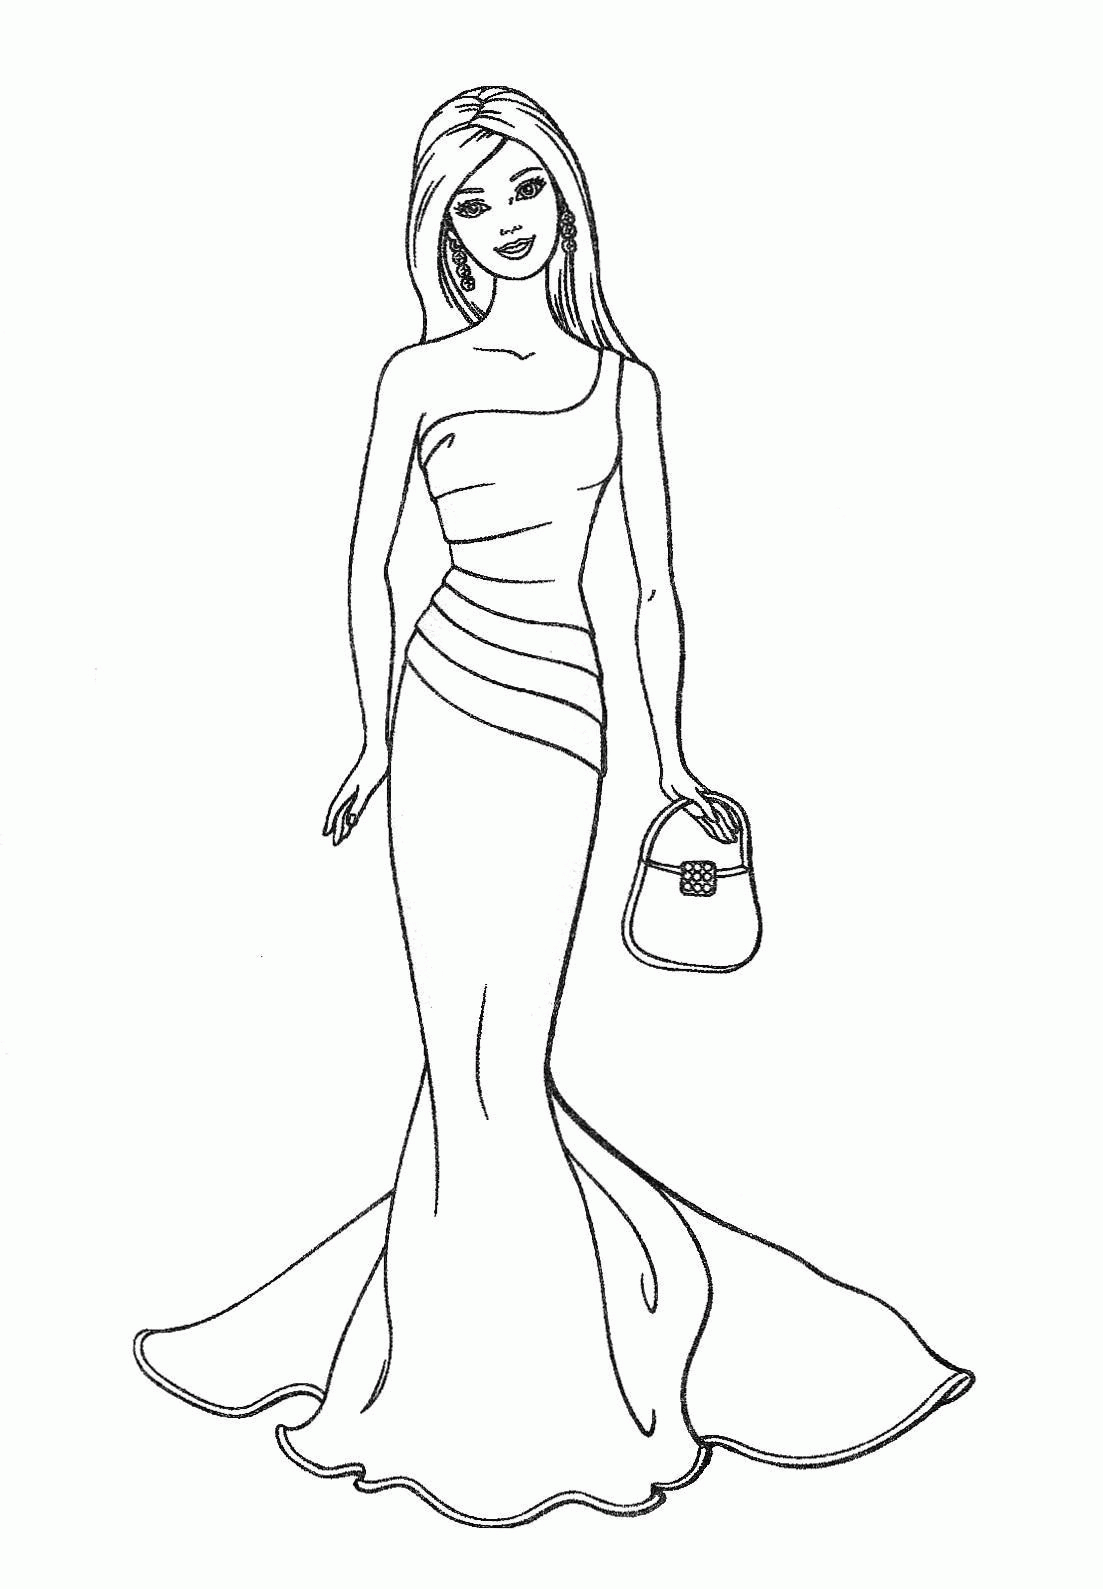 Barbie Coloring Pages Pdf   Coloring Home